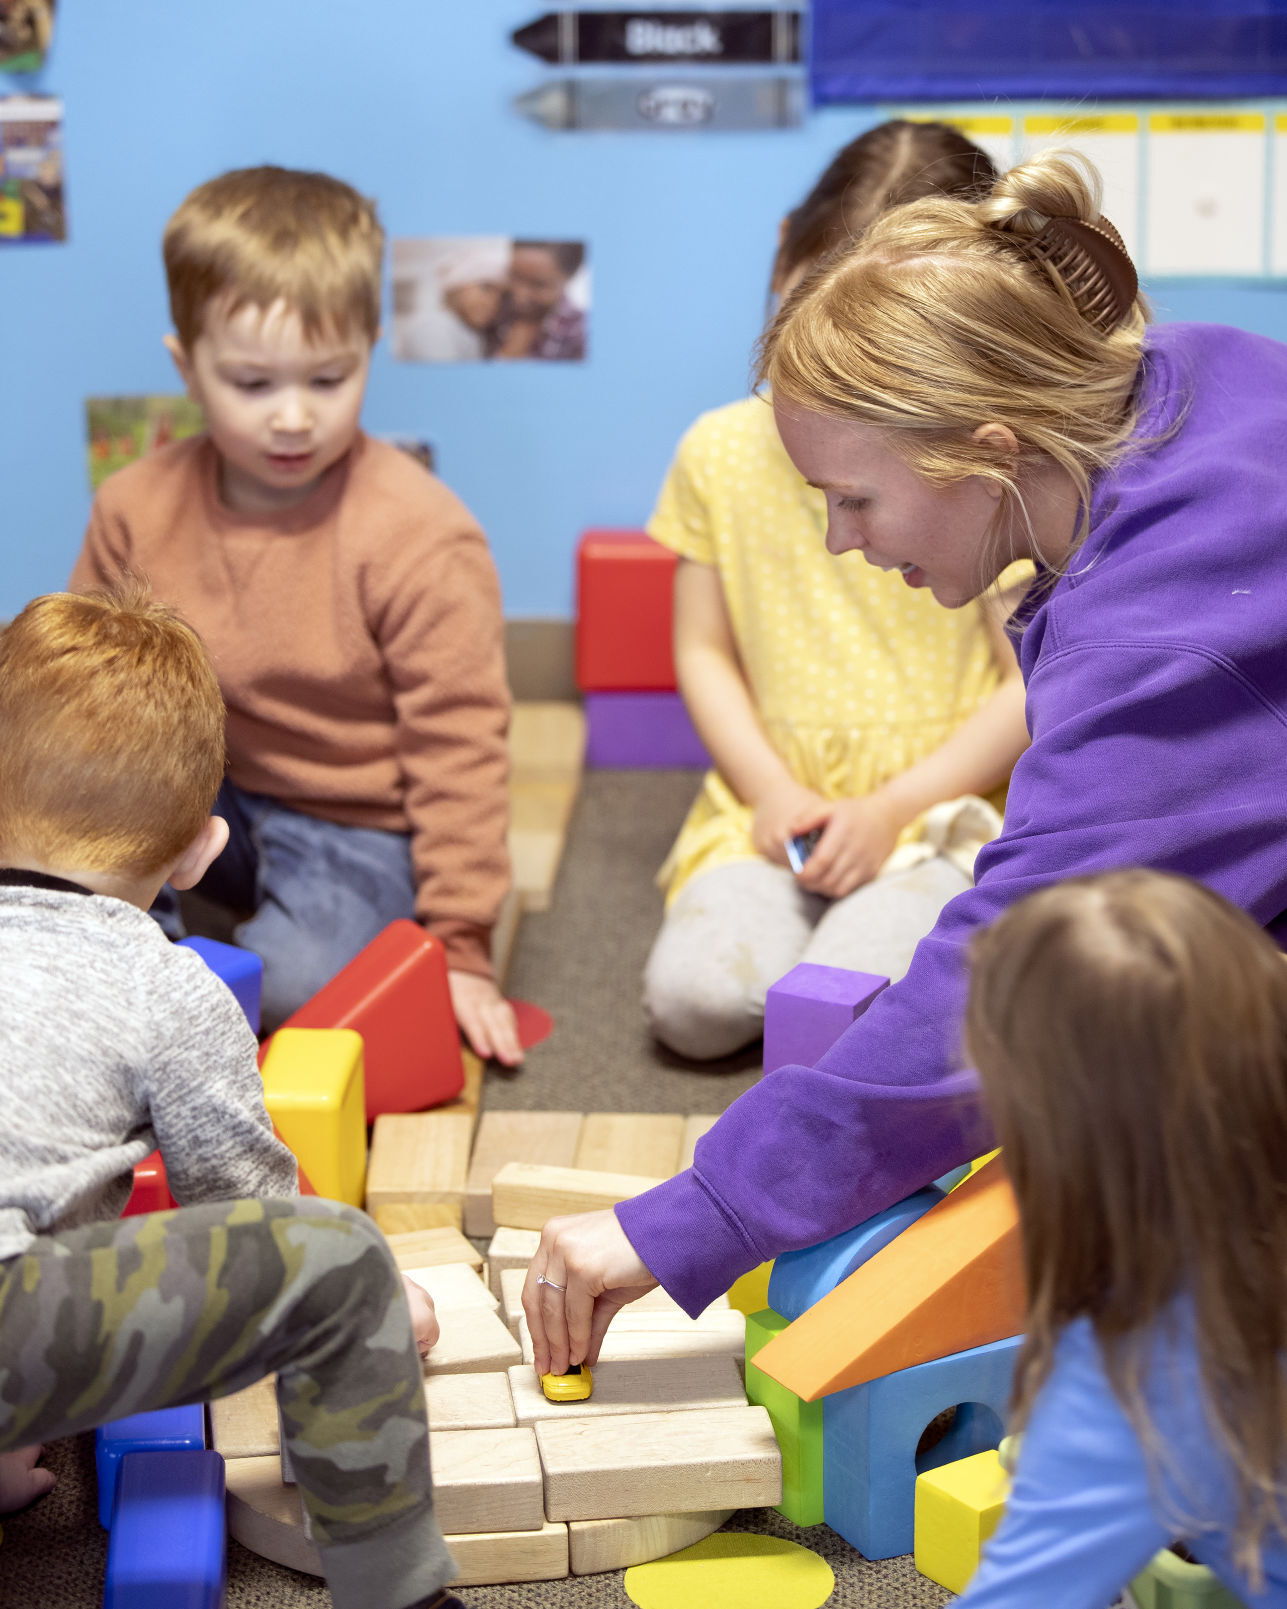 Young-Uns Child Care teacher Mariah McNamara plays with the 3-year-olds at the center on Monday, April 18, 2022.    PHOTO CREDIT: Stephen Gassman